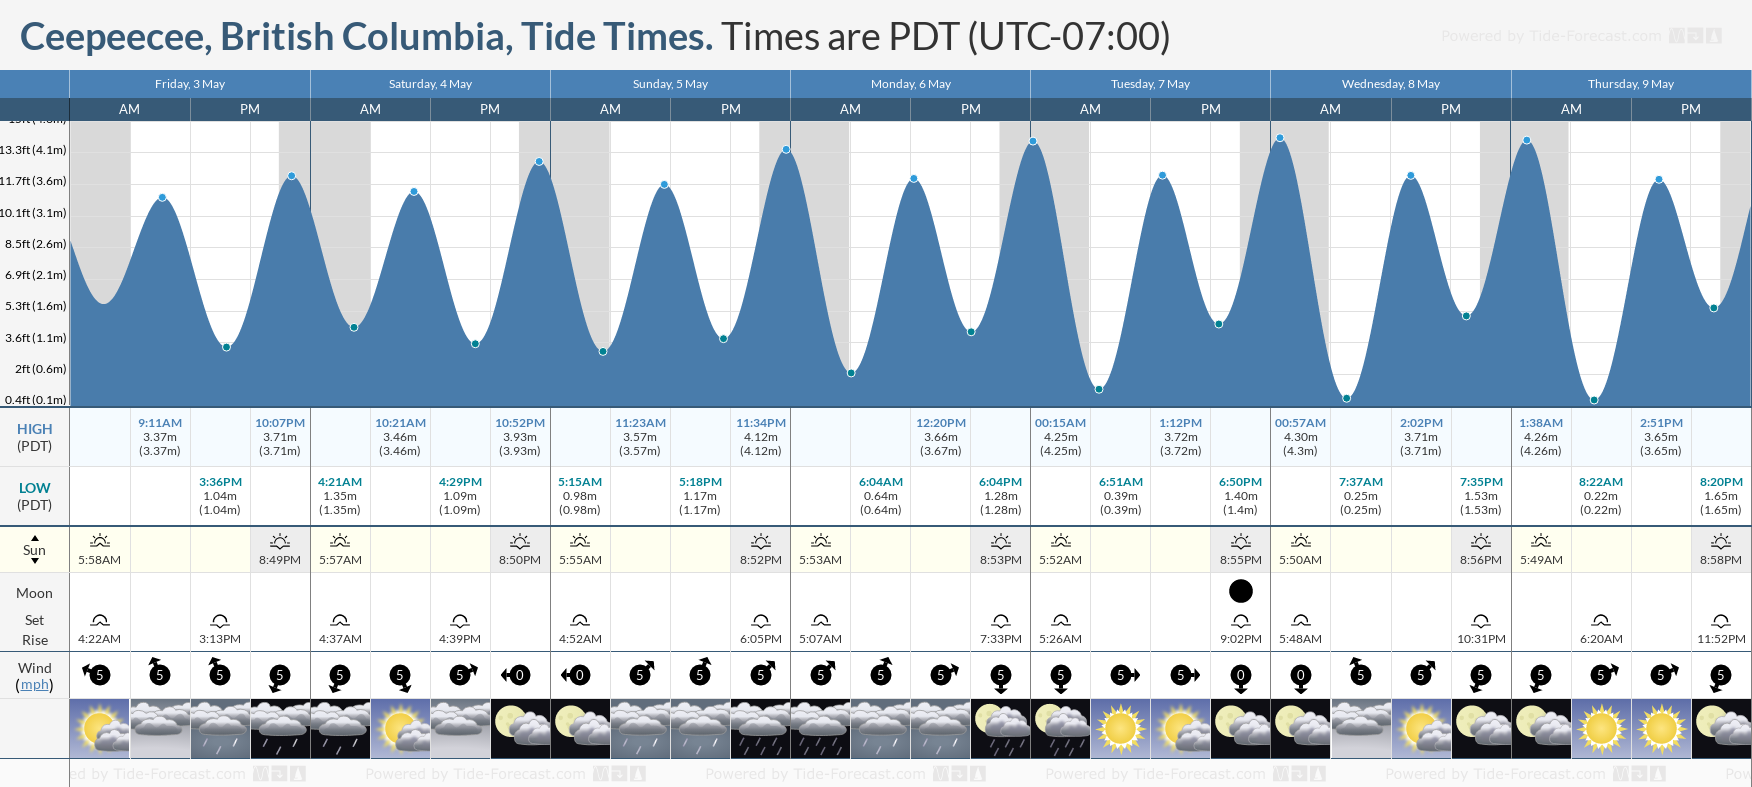 Ceepeecee, British Columbia Tide Chart including high and low tide tide times for the next 7 days